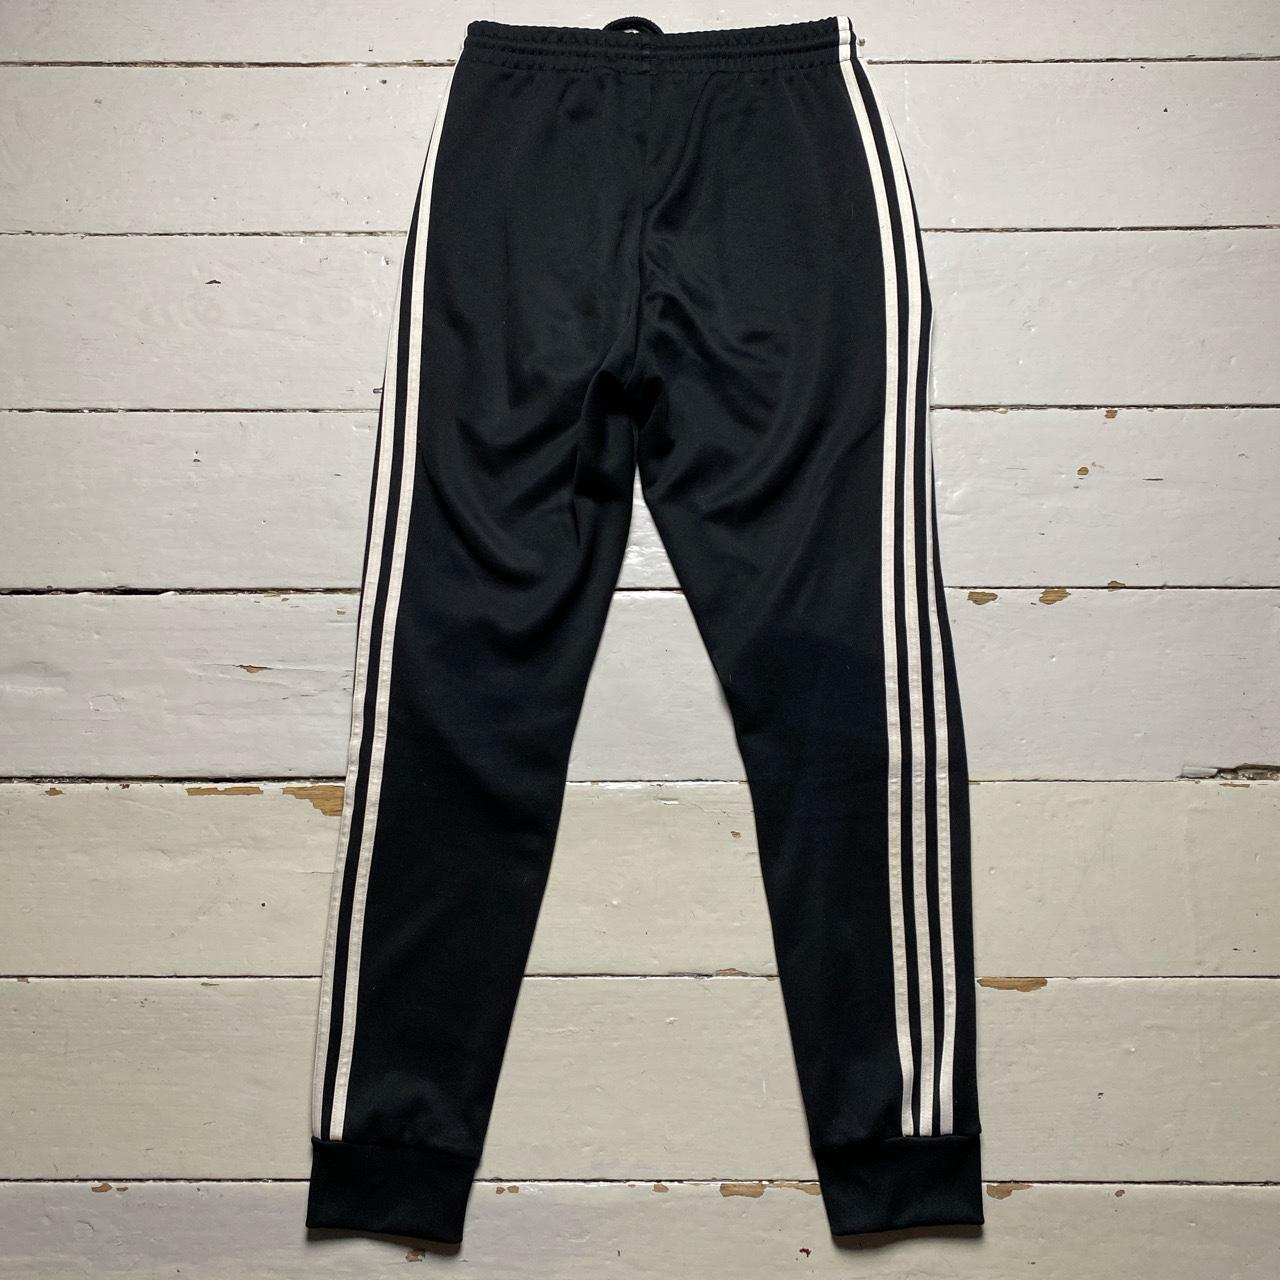 Adidas SST Black and White Tracksuit